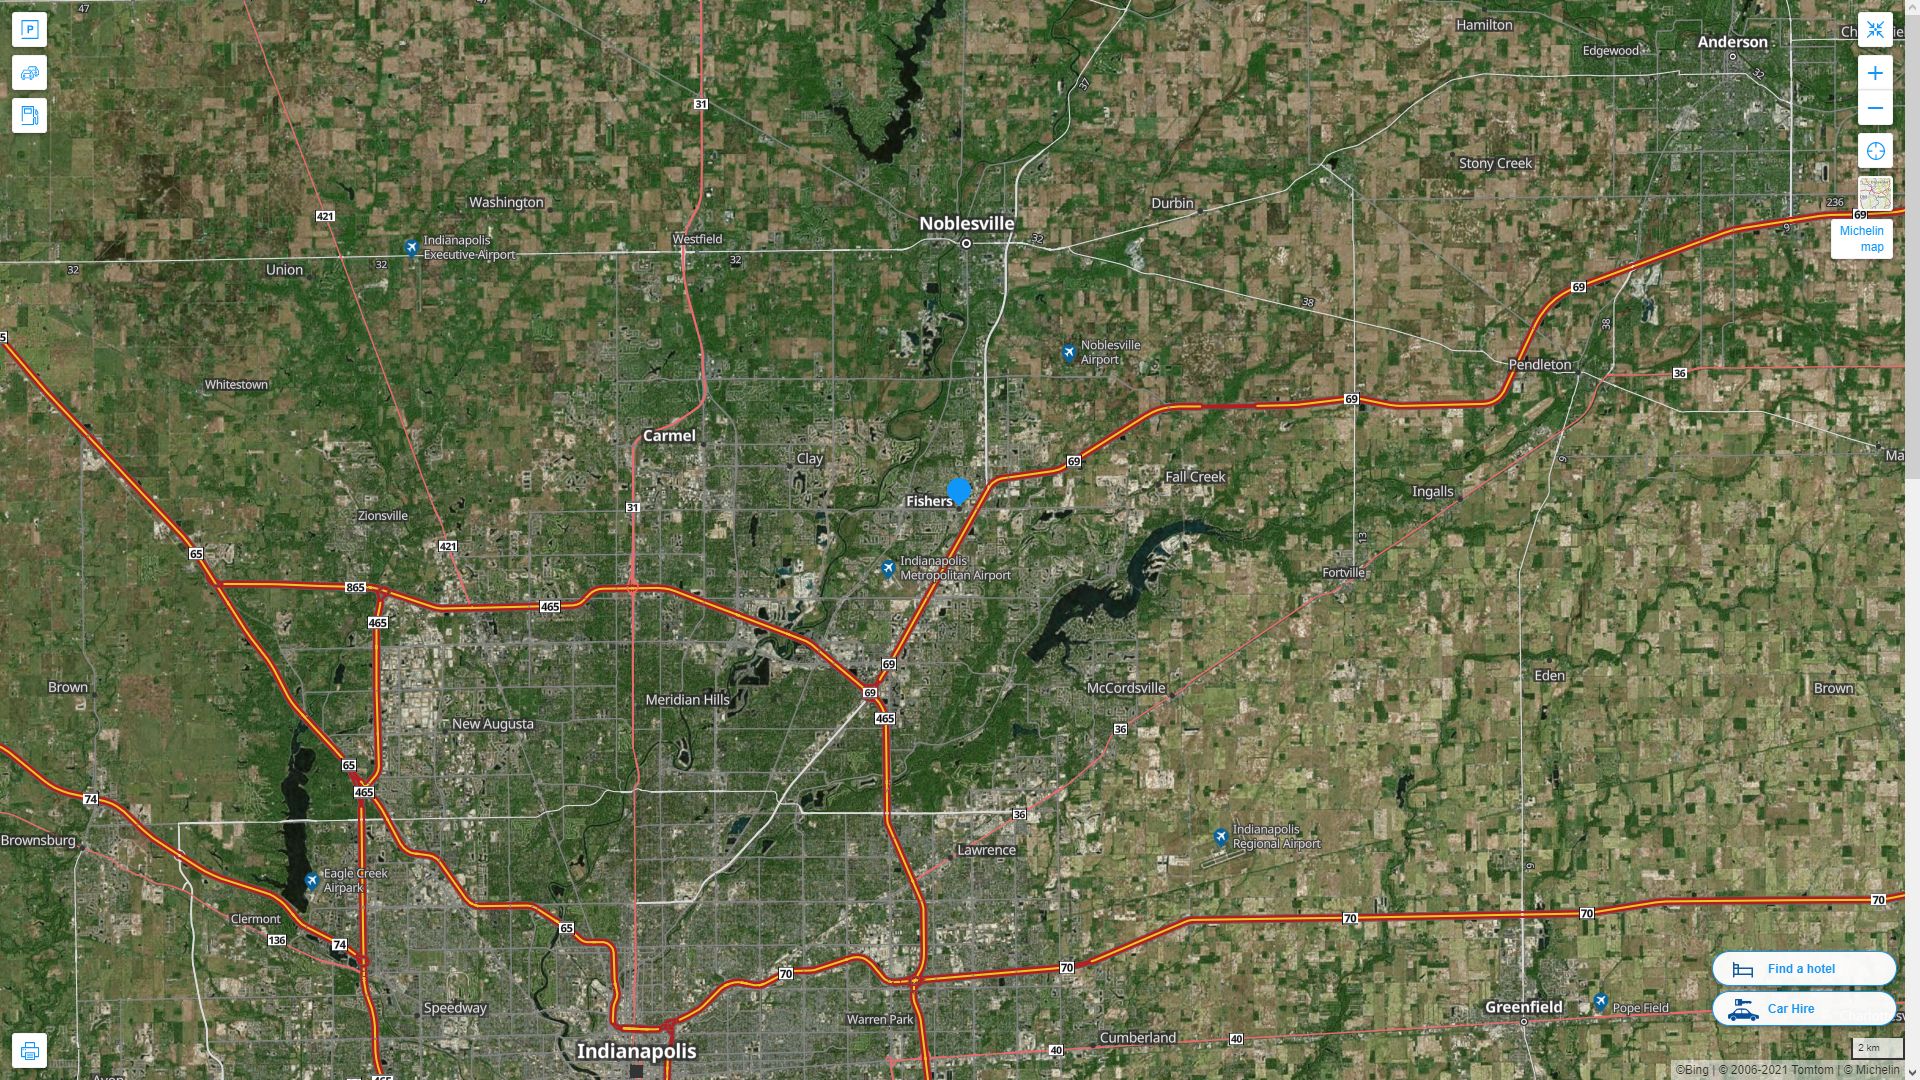 Fishers Indiana Highway and Road Map with Satellite View